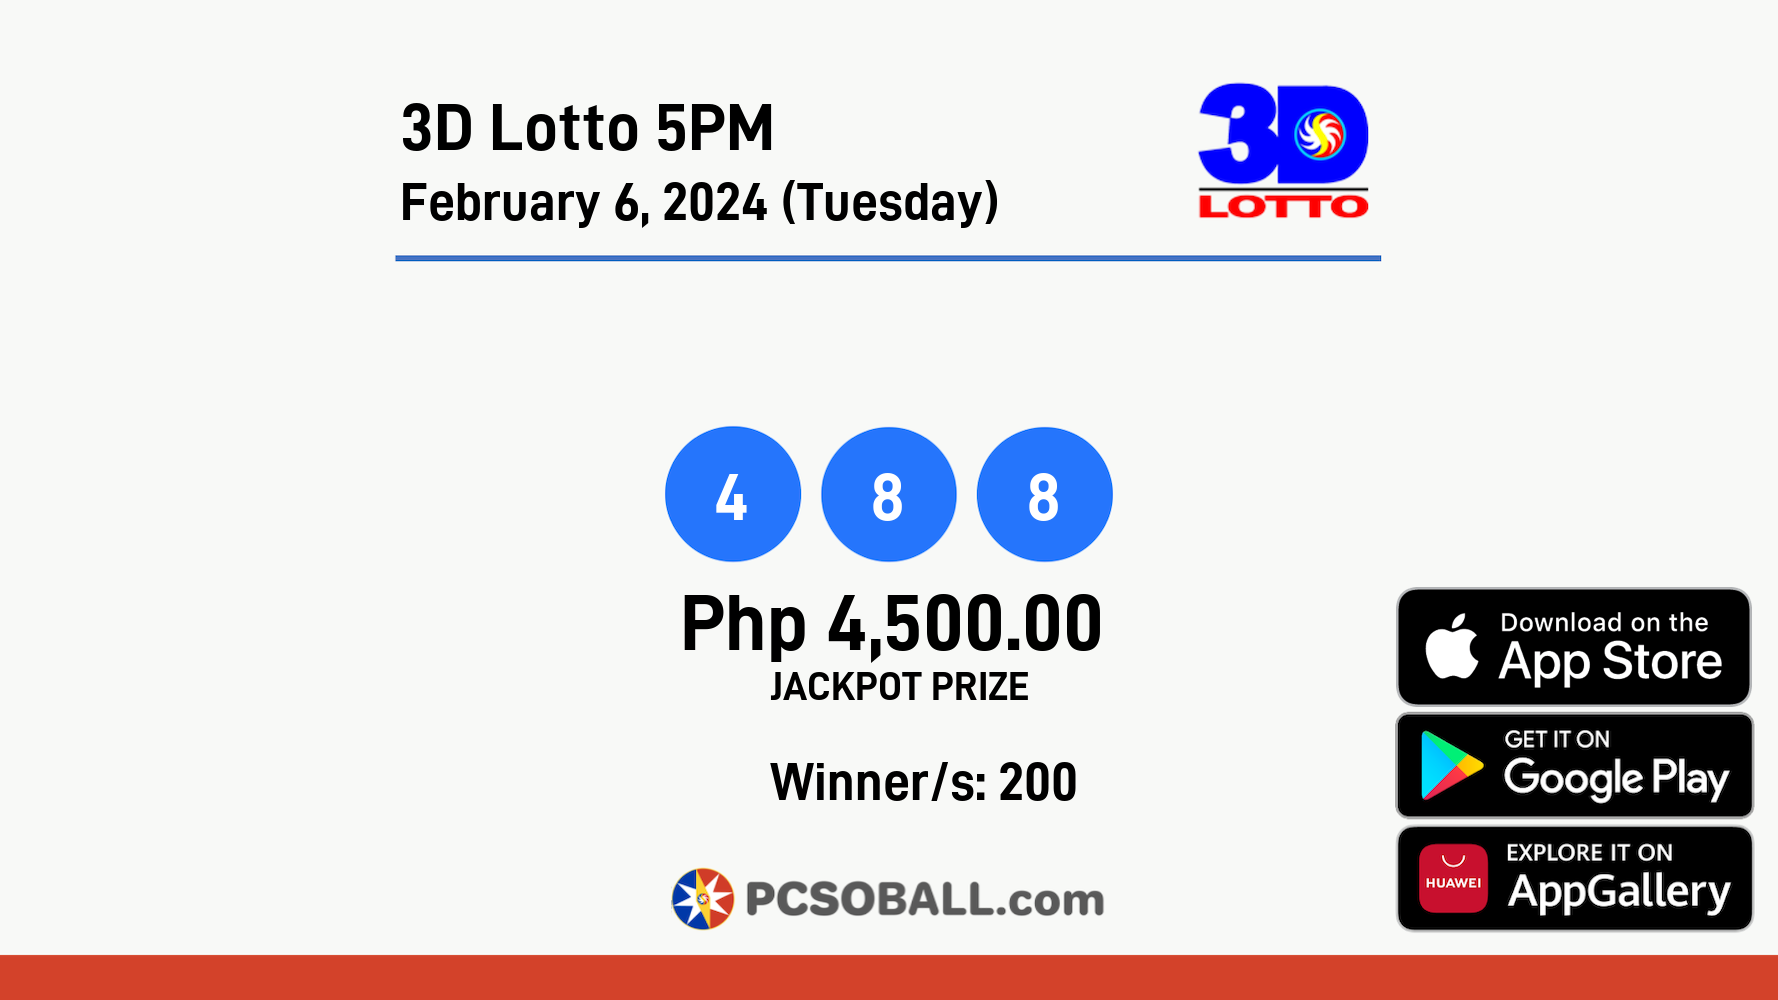 3D Lotto 5PM February 6, 2024 (Tuesday) Result